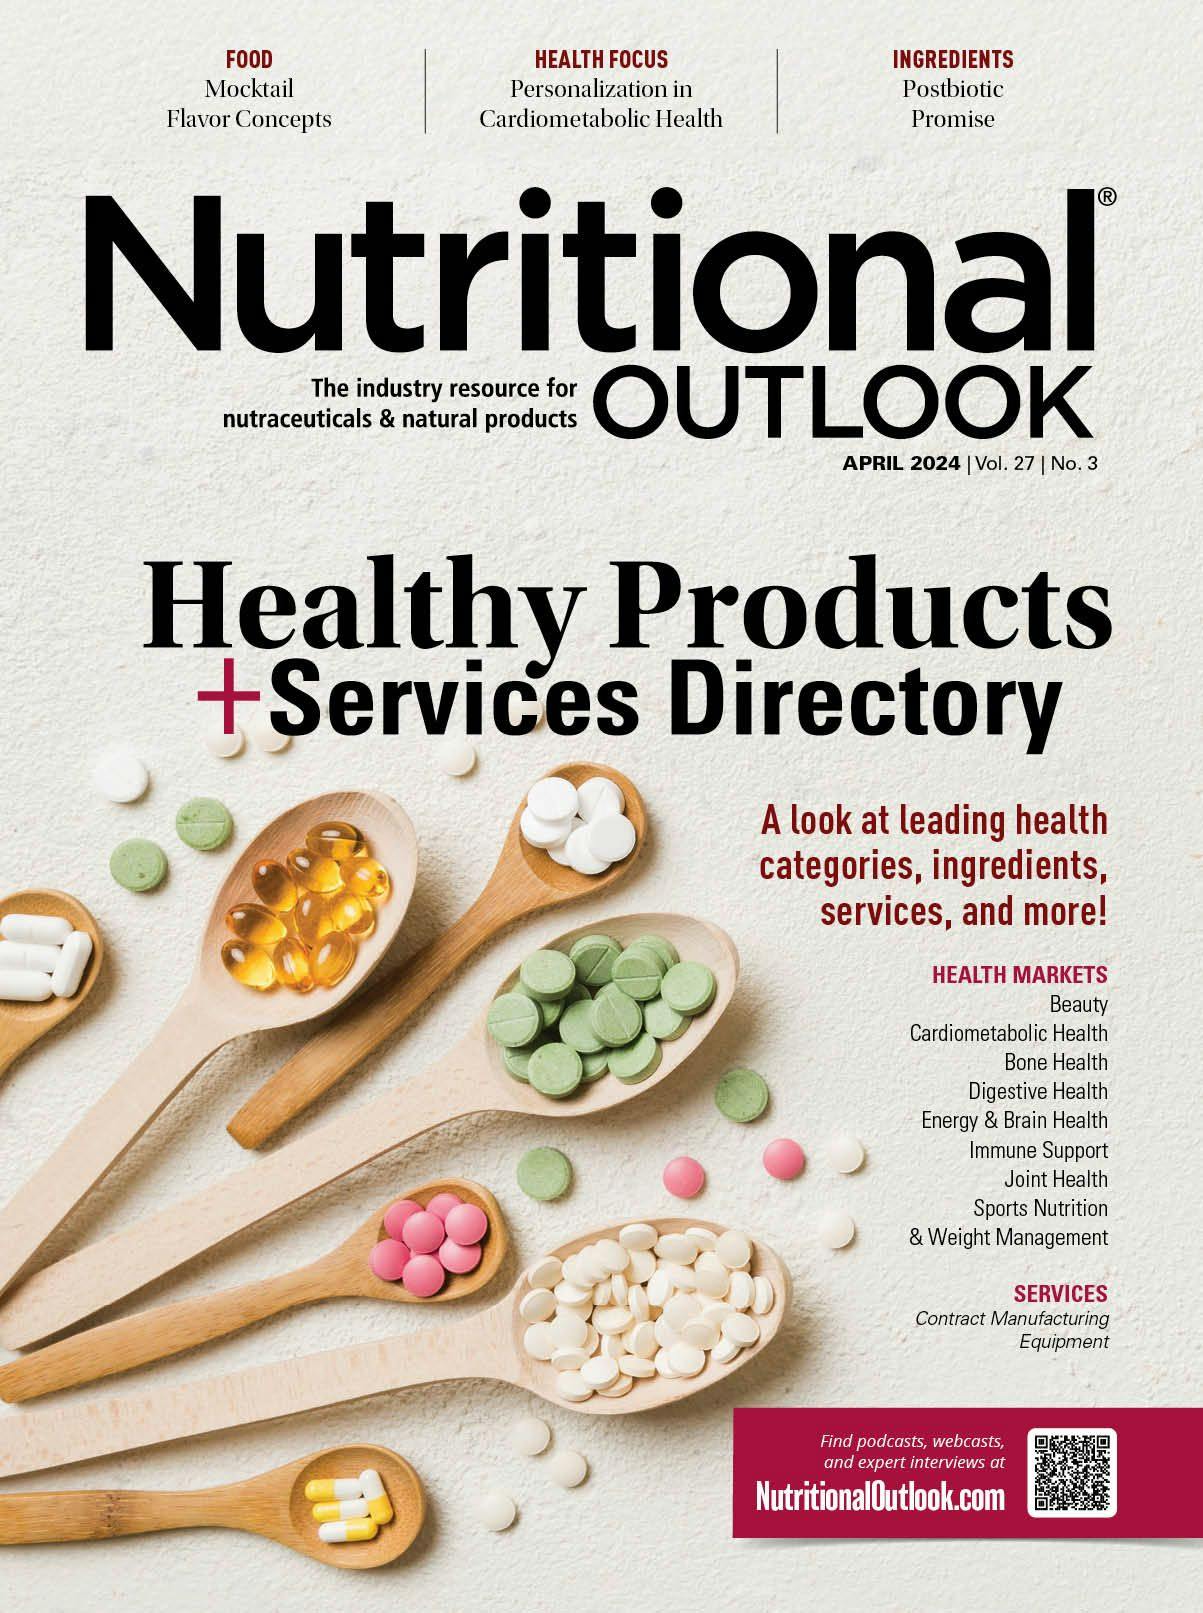 Nutritional Outlook Vol. 27 No. 3